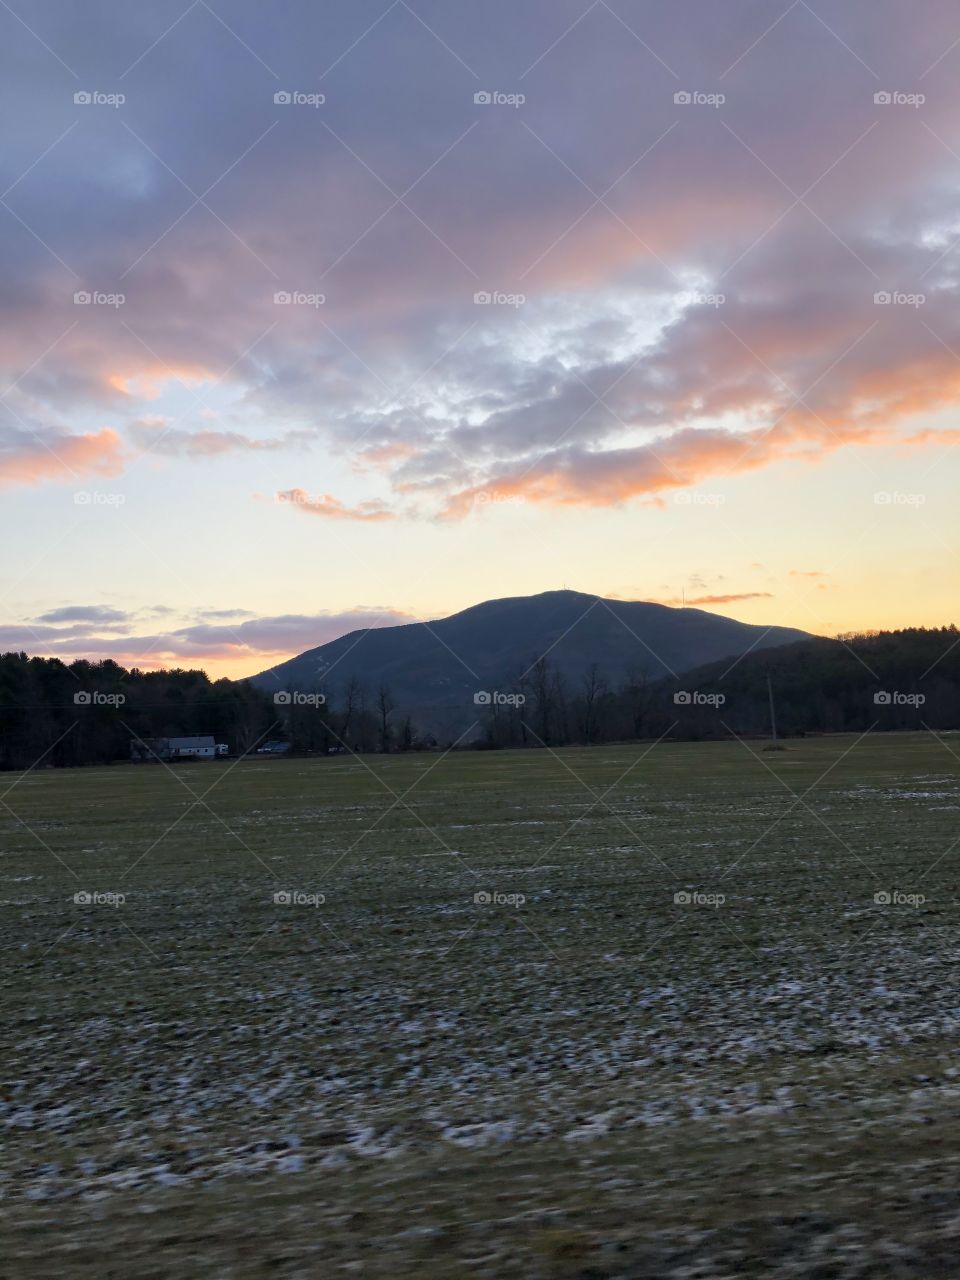  Beautiful vermont sunrise, with a breathtaking Mountain View. MT. Ascutney 